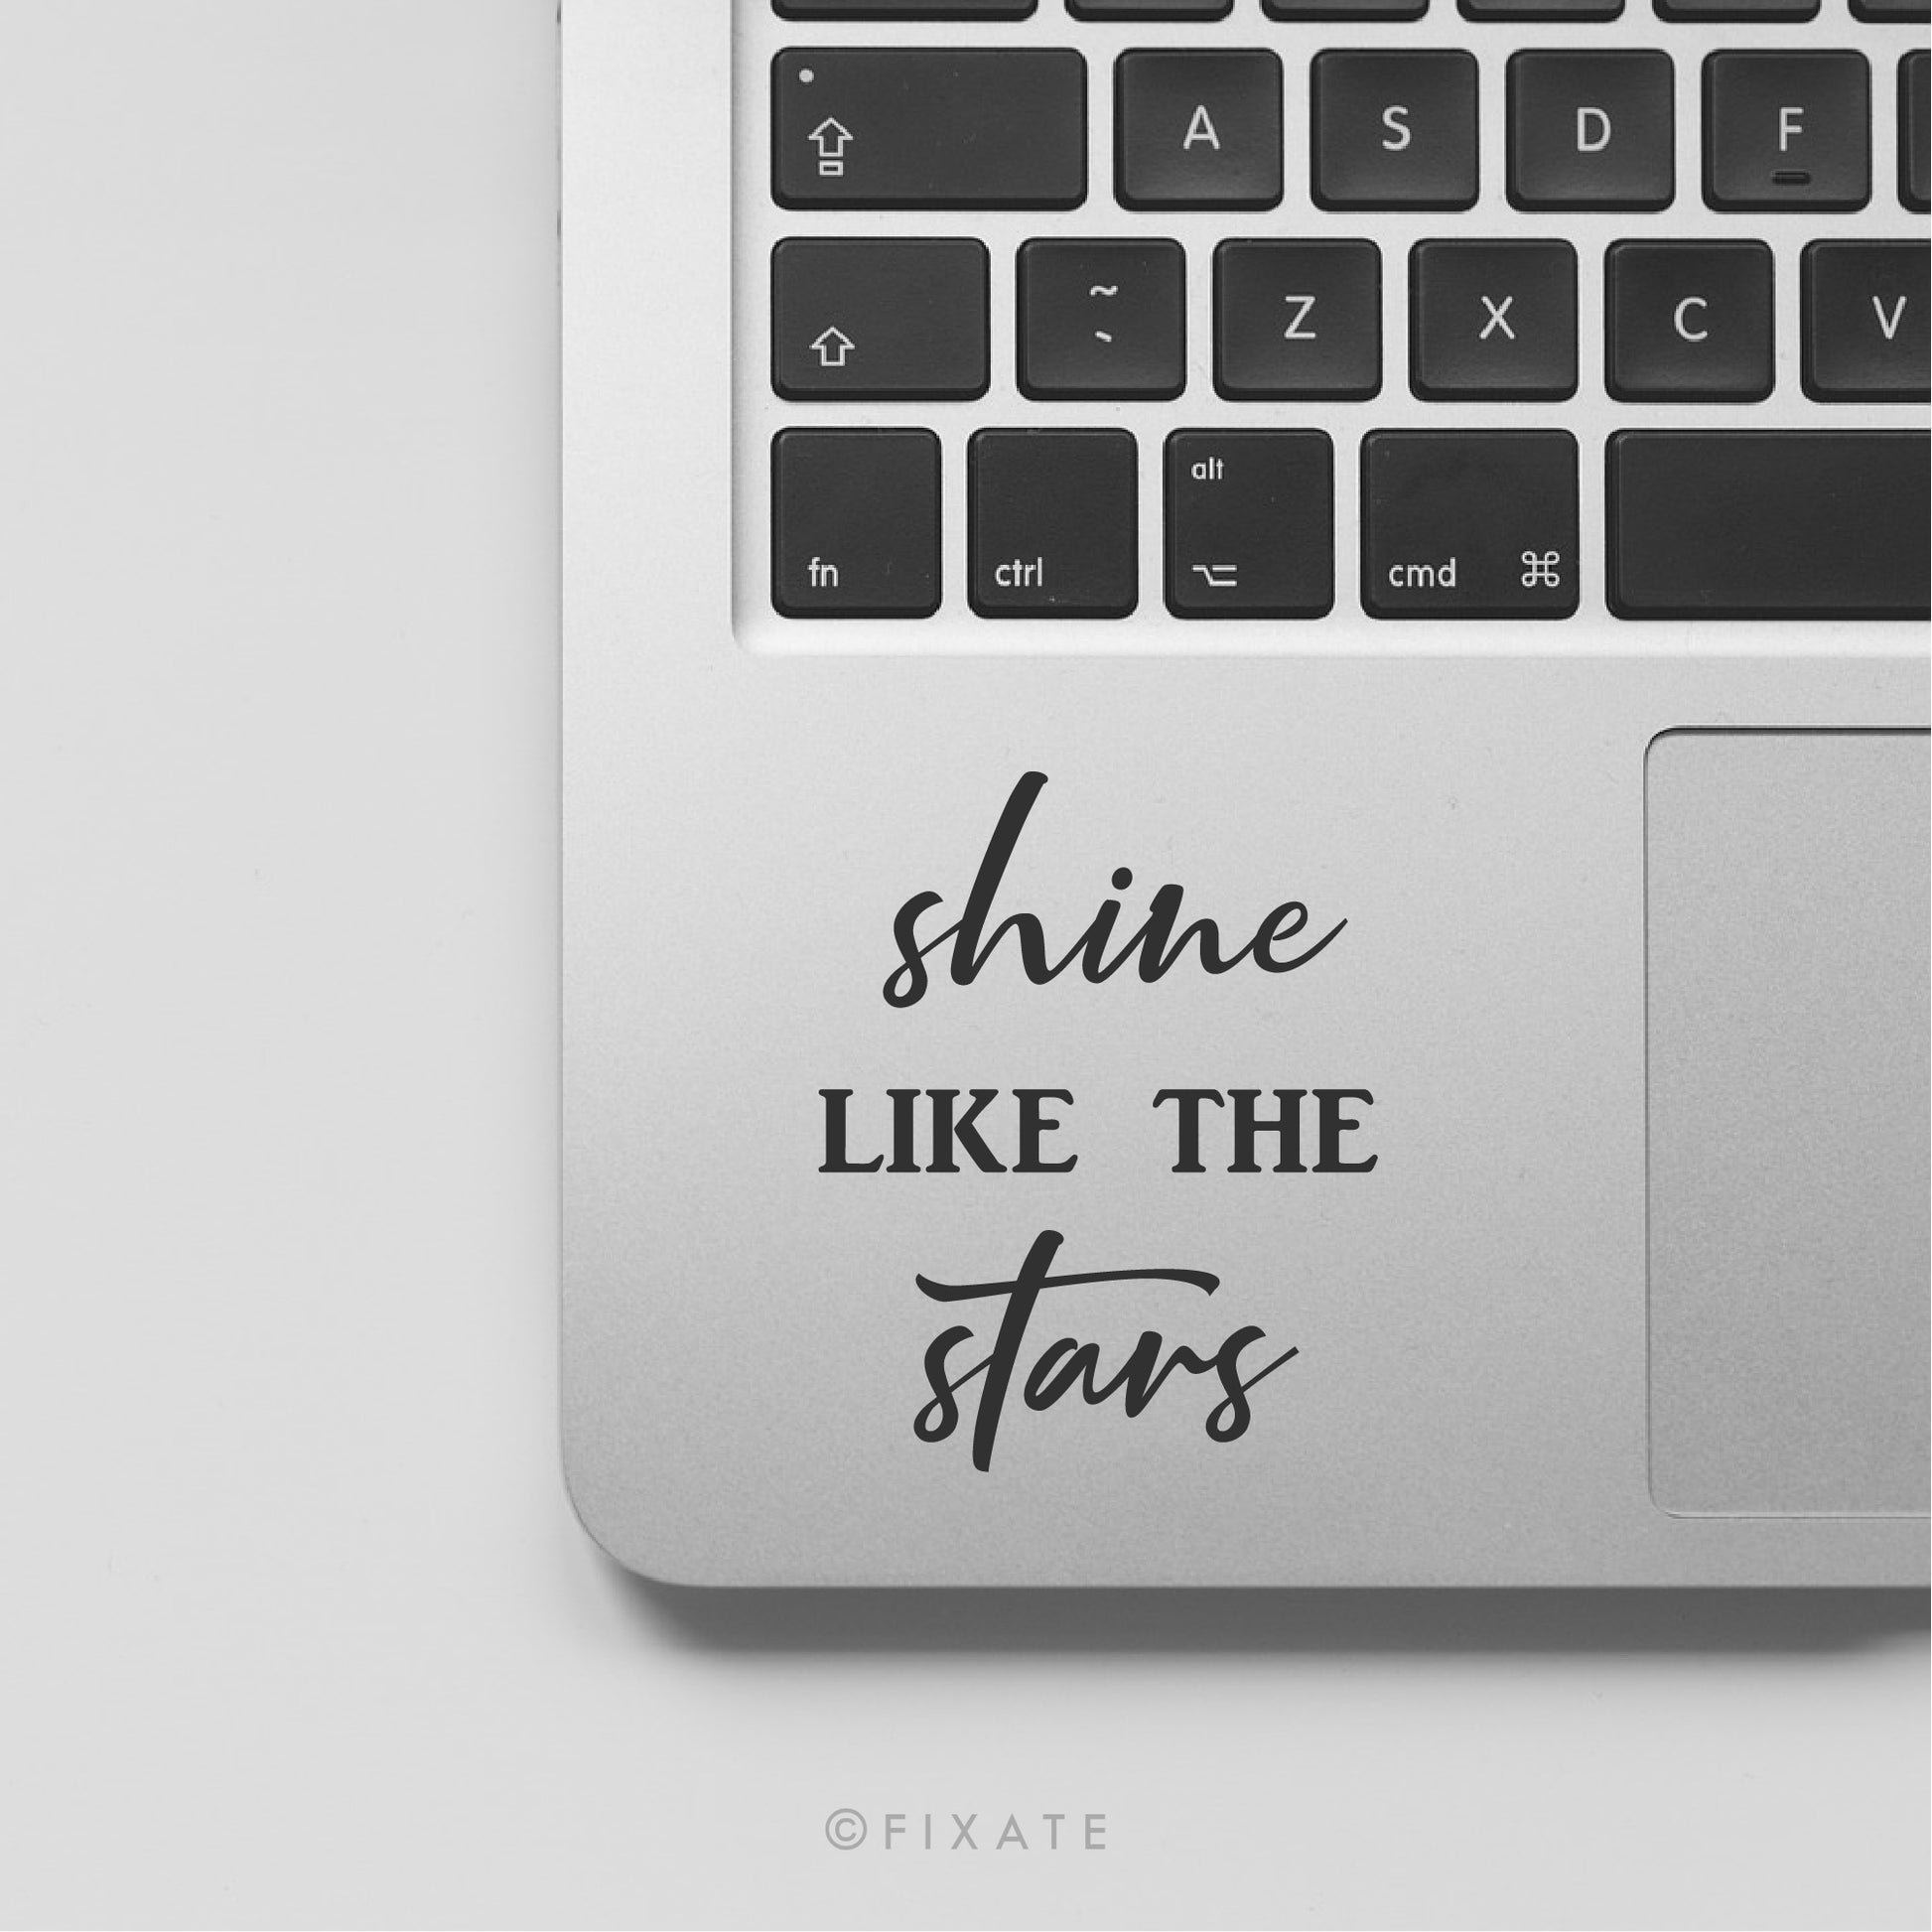 Mackbook Decal Positive Quote Affirmation Daily Reminder Cute Removable Vinyl - Shine Like The Stars Black White or Grey